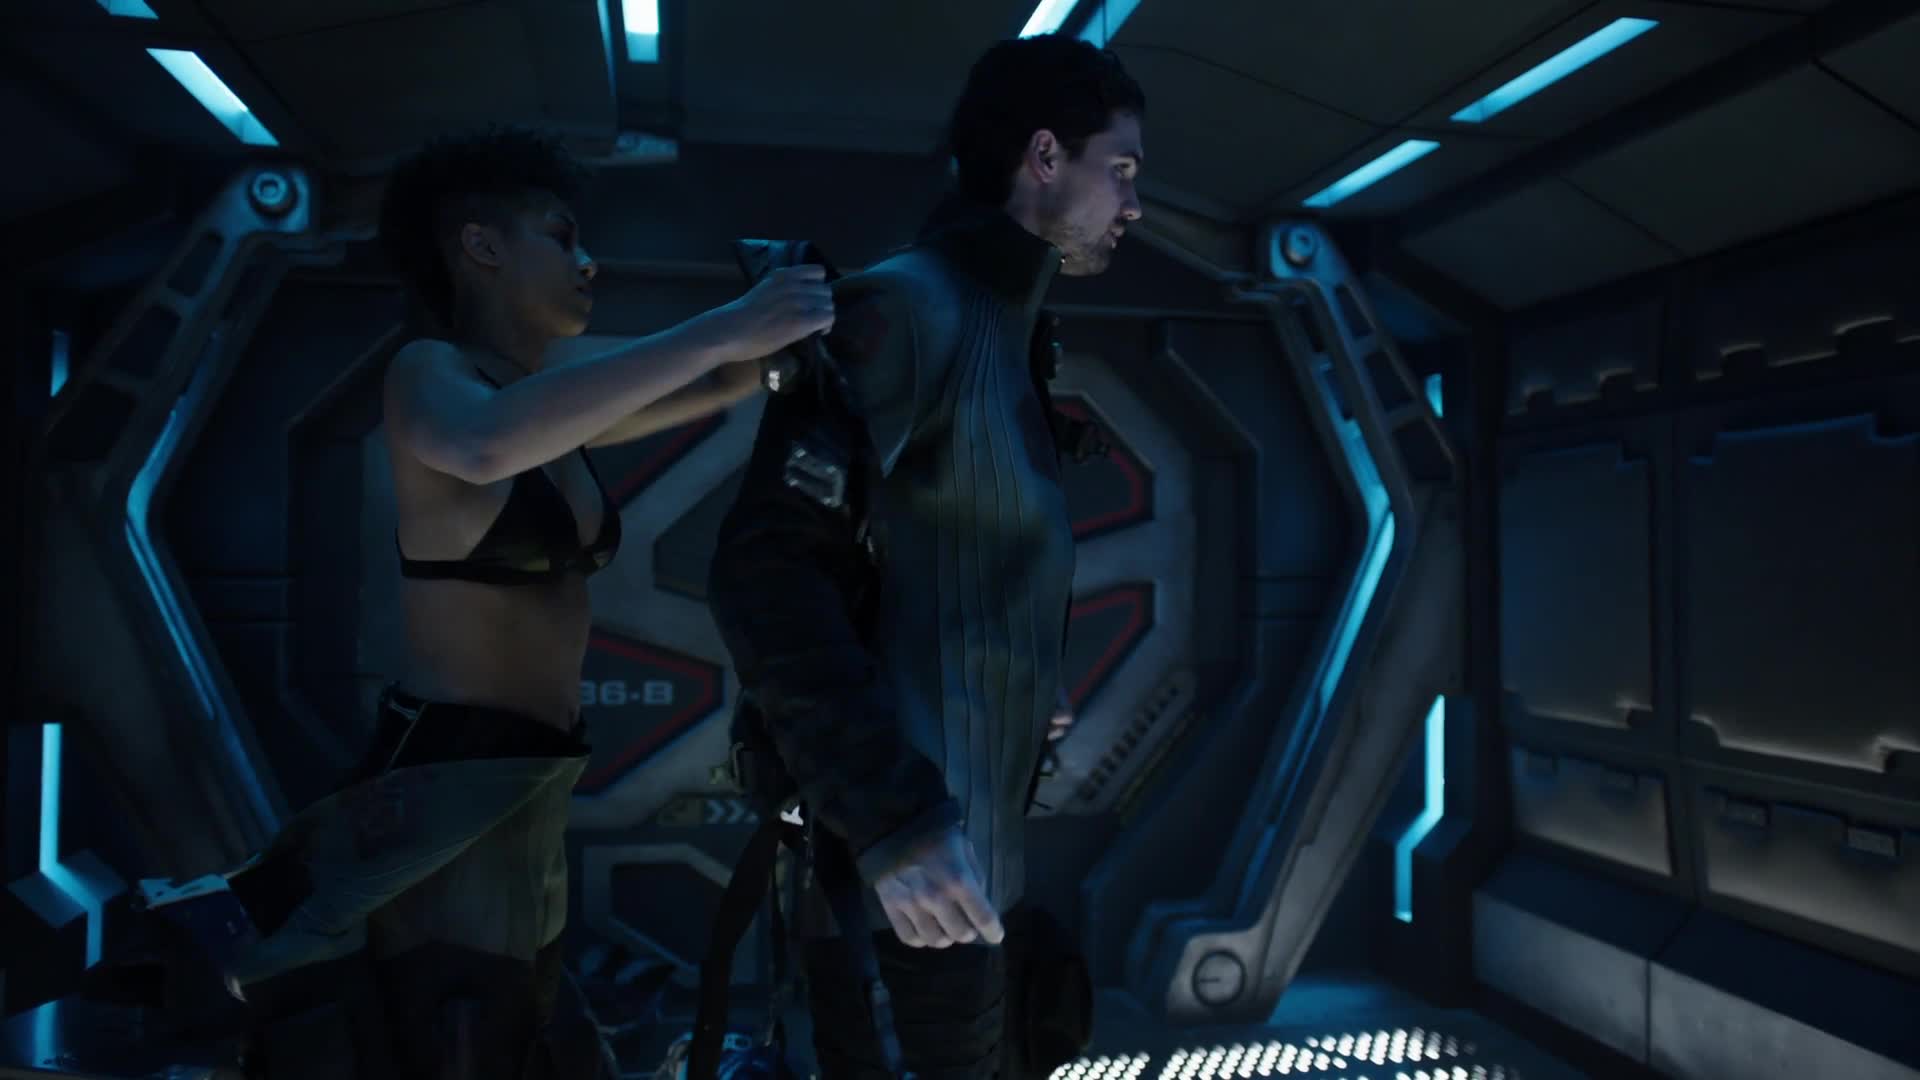 The Expanse (Season 1) Nude Scenes Review